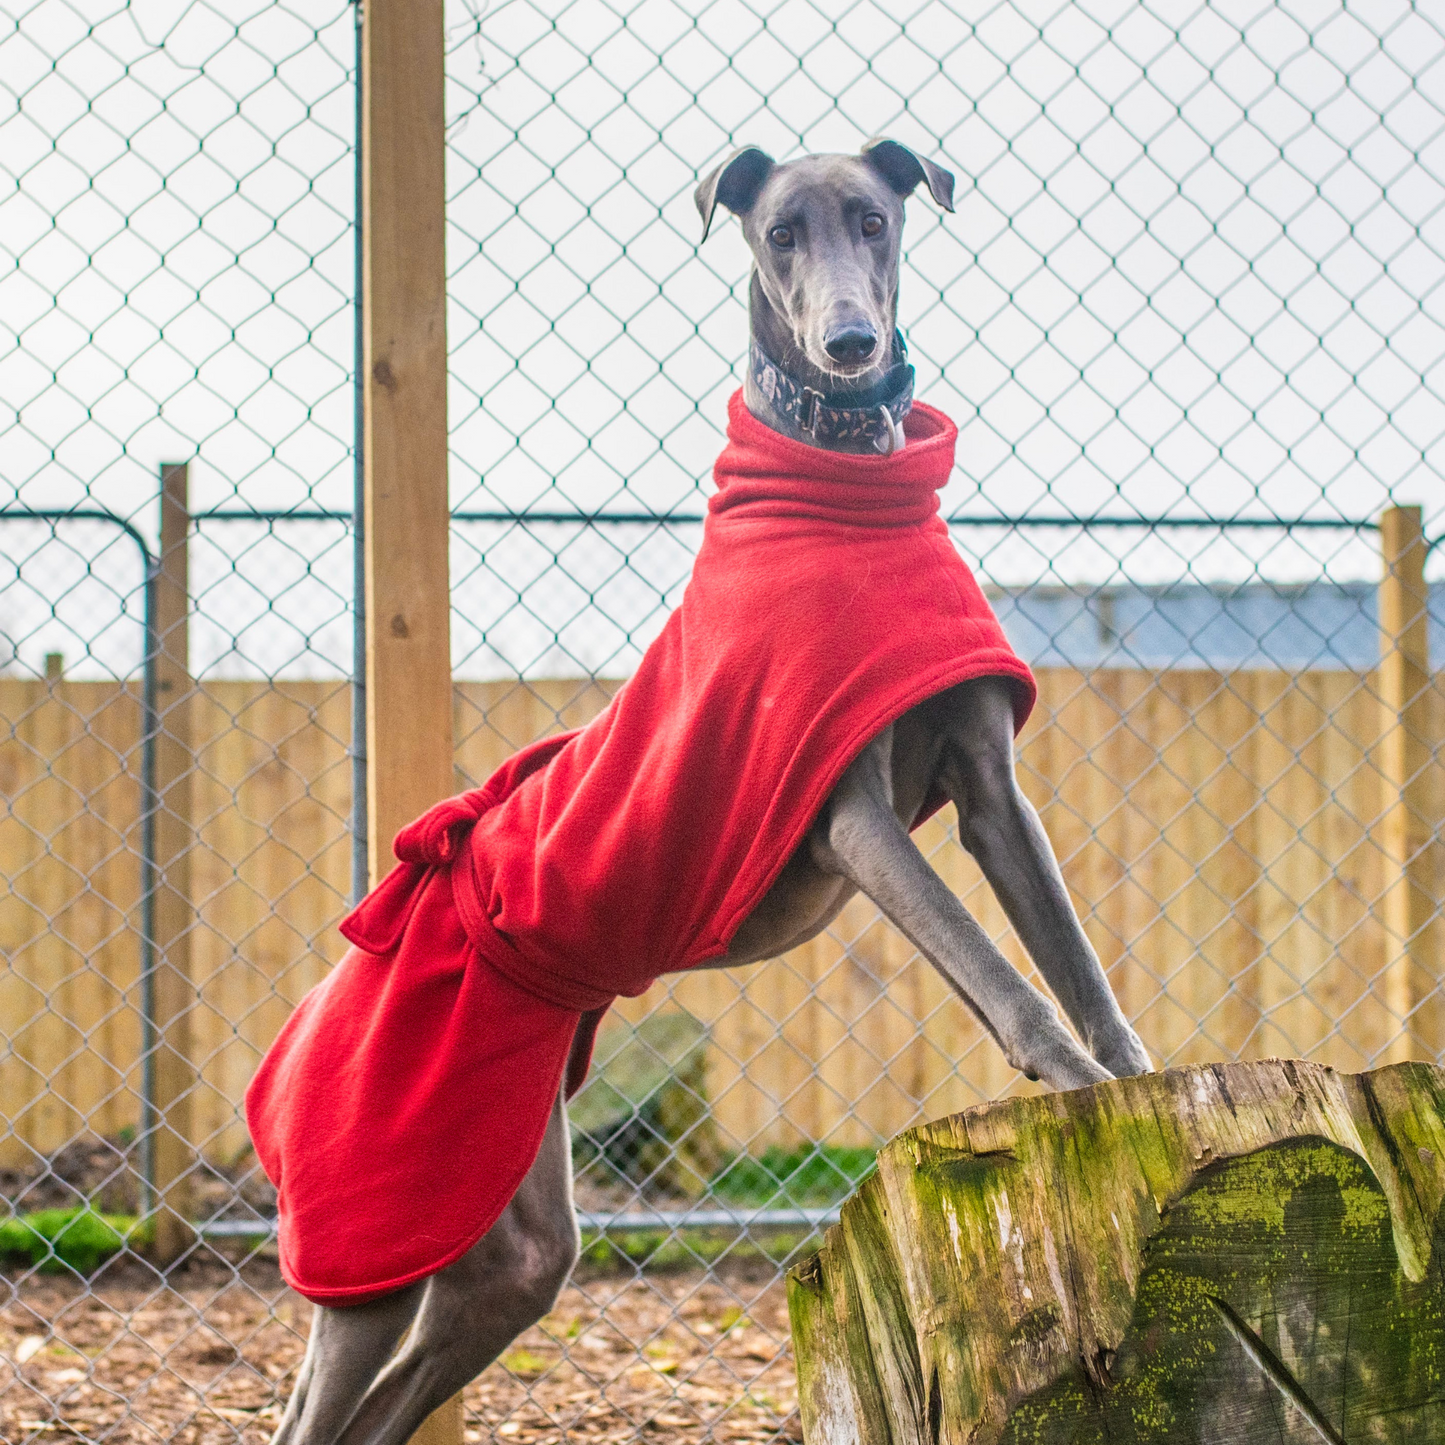 Buy a treat for a greyhound!